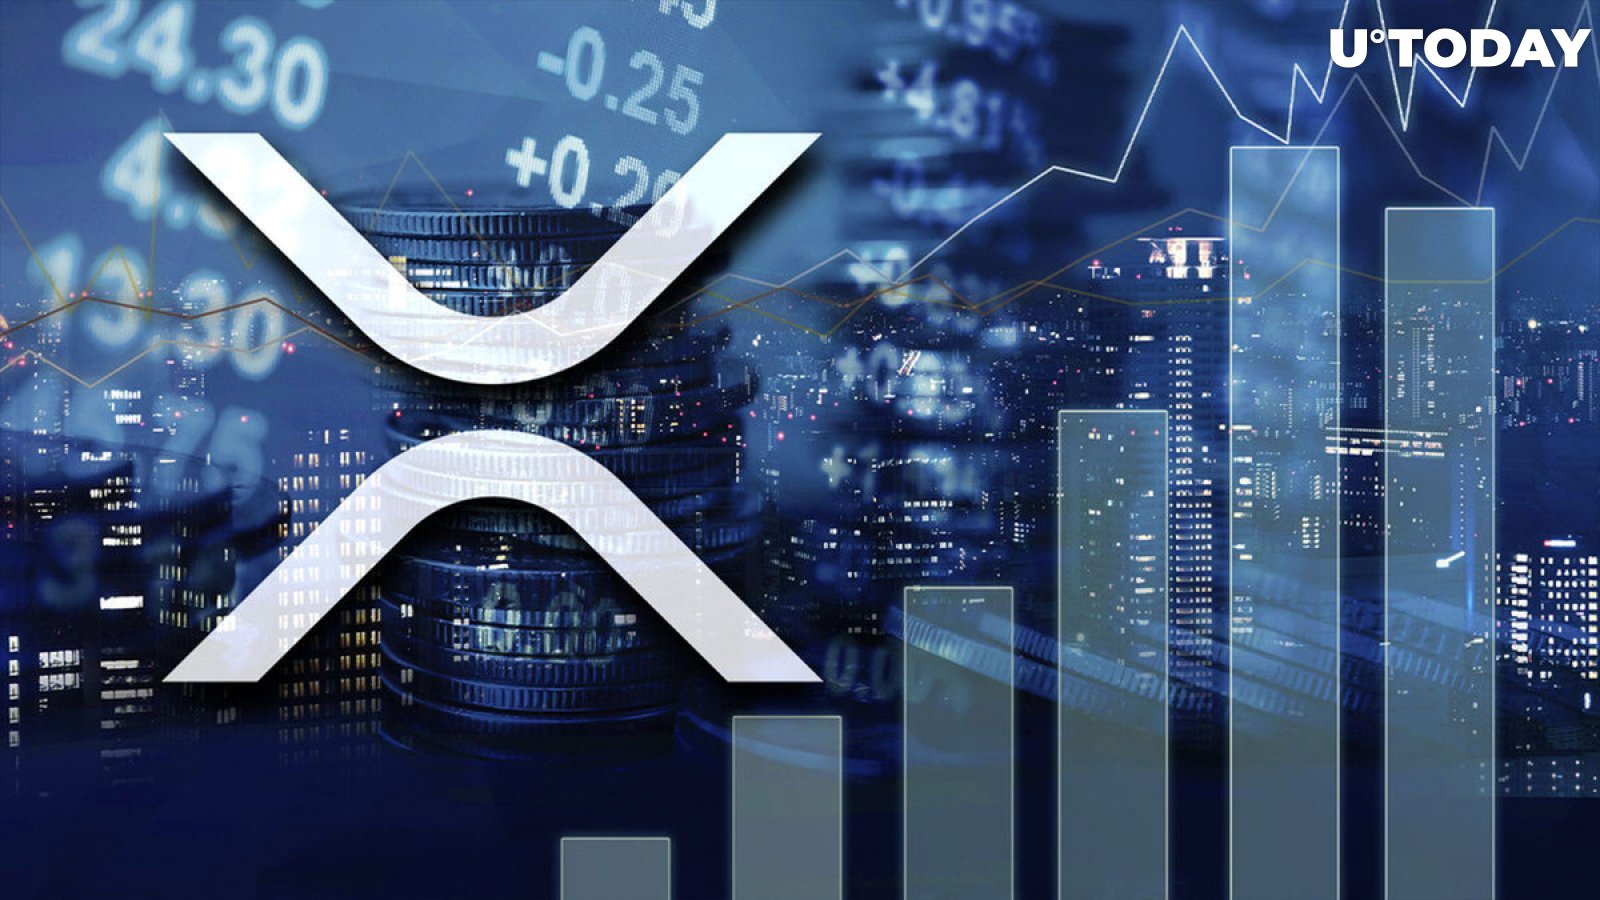 XRP Price Jumps 4%, Will XRP End Week in Gains Amid Current Volatility?